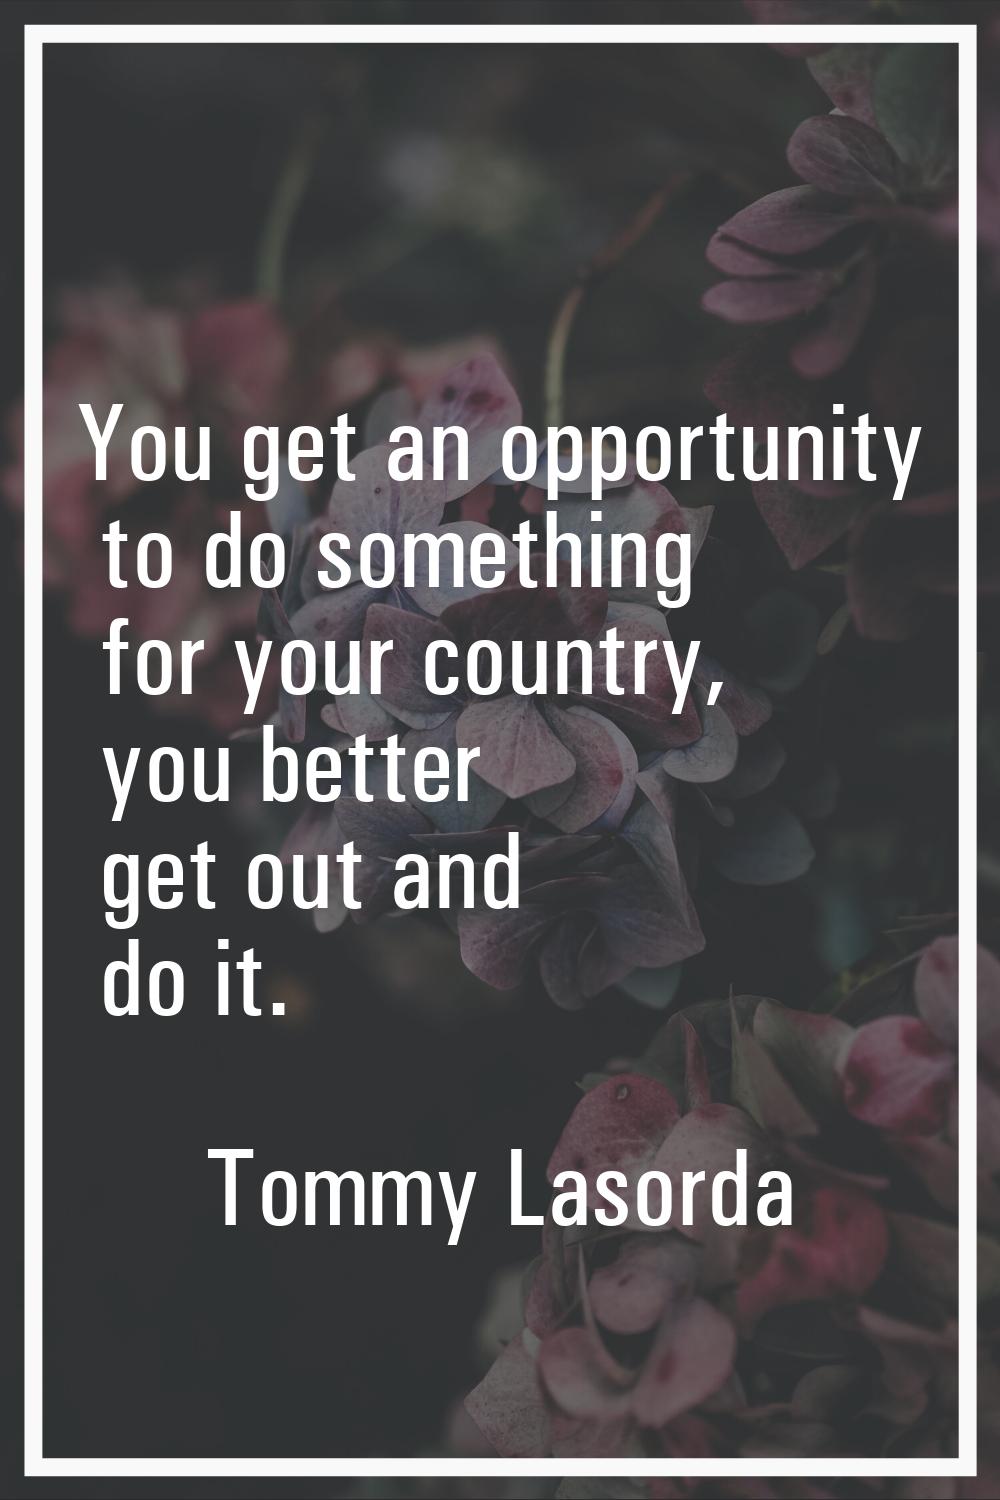 You get an opportunity to do something for your country, you better get out and do it.